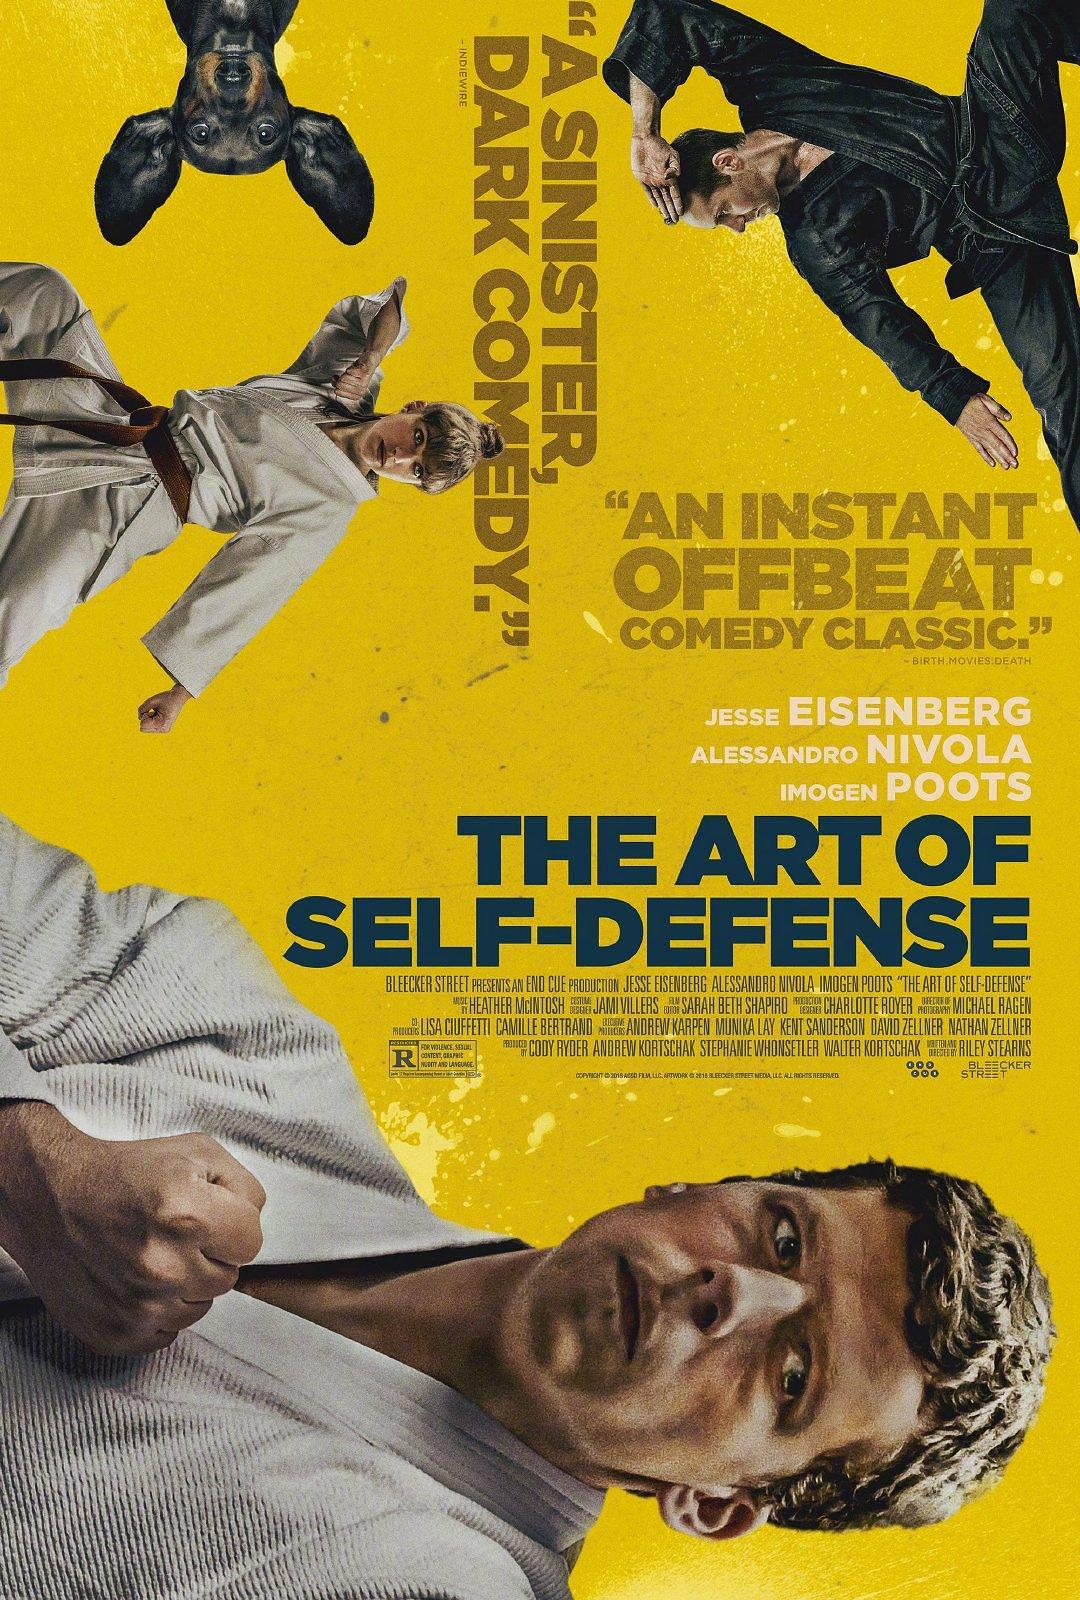  The.Art.of.Self.Defense.2019.1080p.BluRay.REMUX.AVC.DTS-HD.MA.5.1-FGT 26.80-1.png